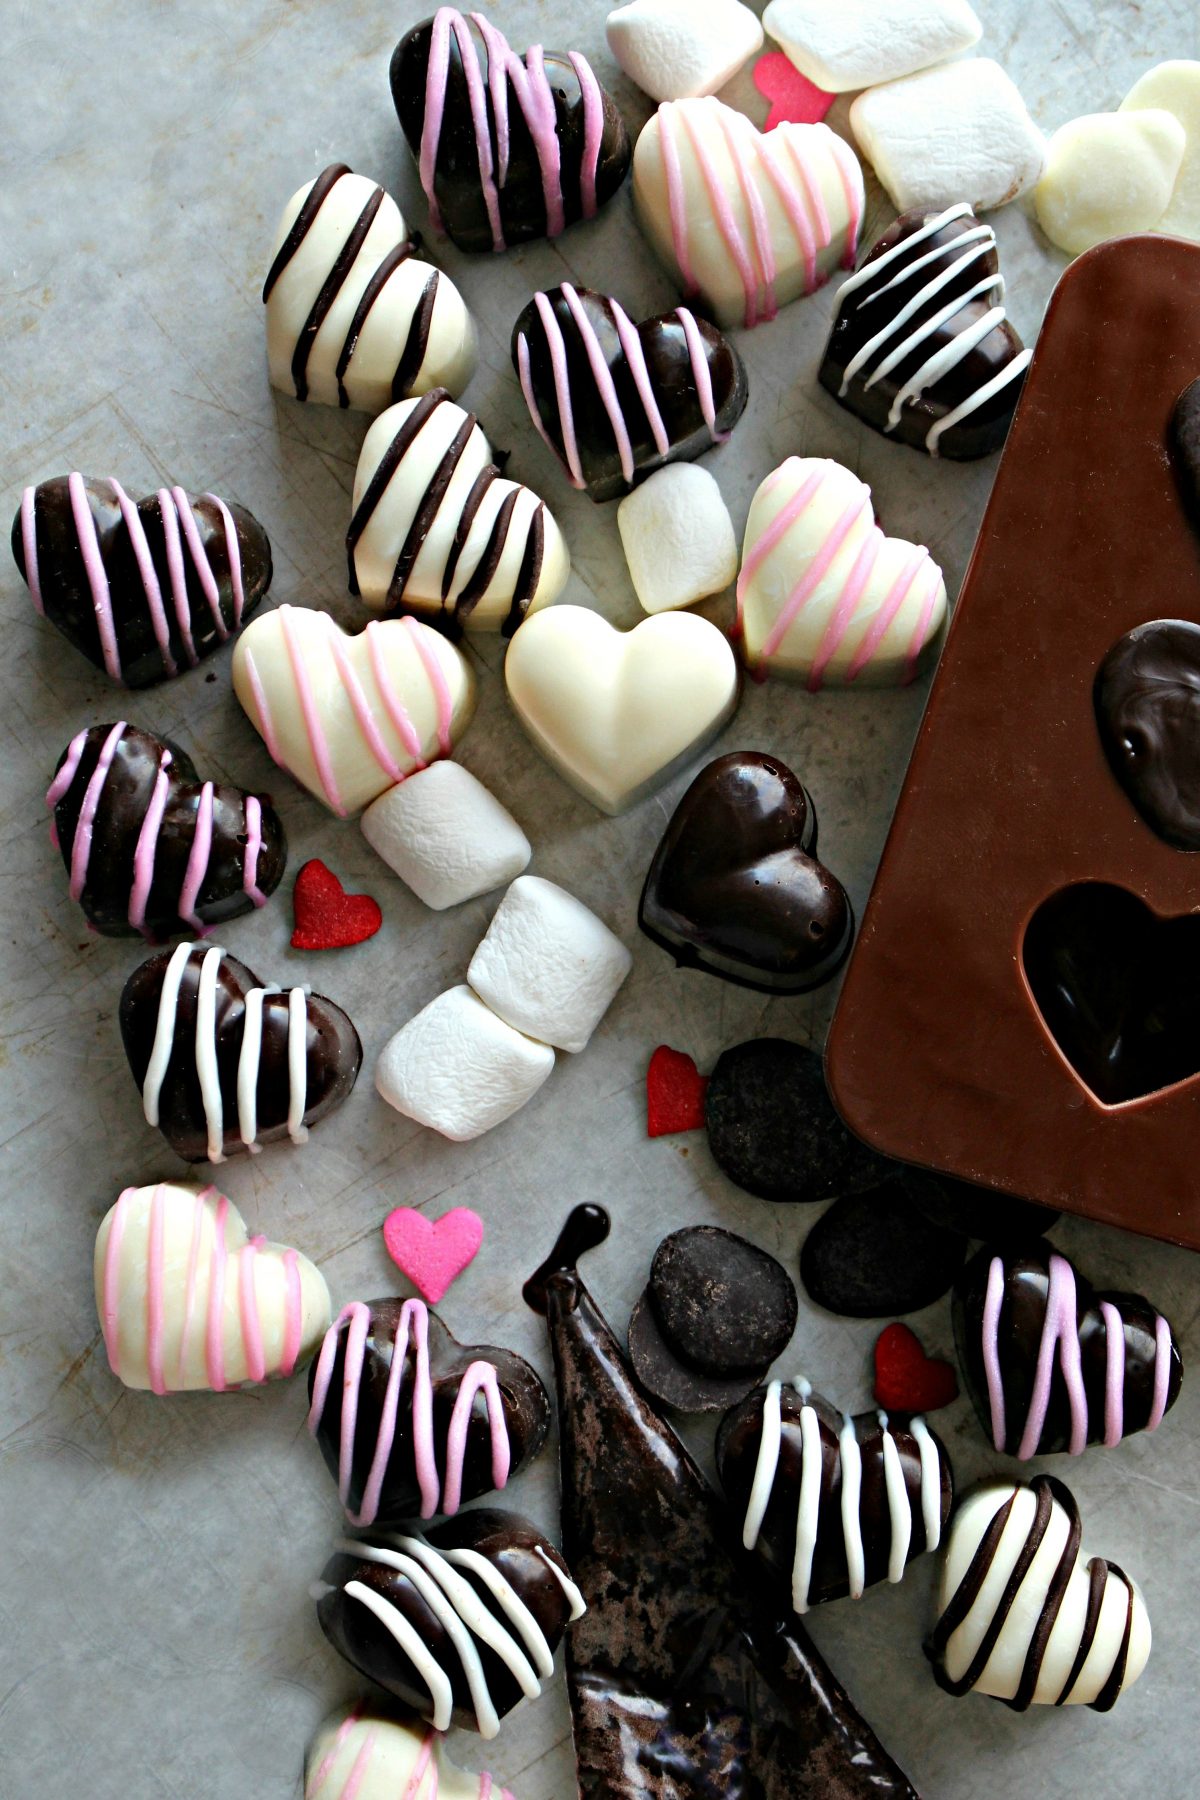 Chocolate molded hearts in dark chocolate and white chocolate decorated with contrasting stripes. 